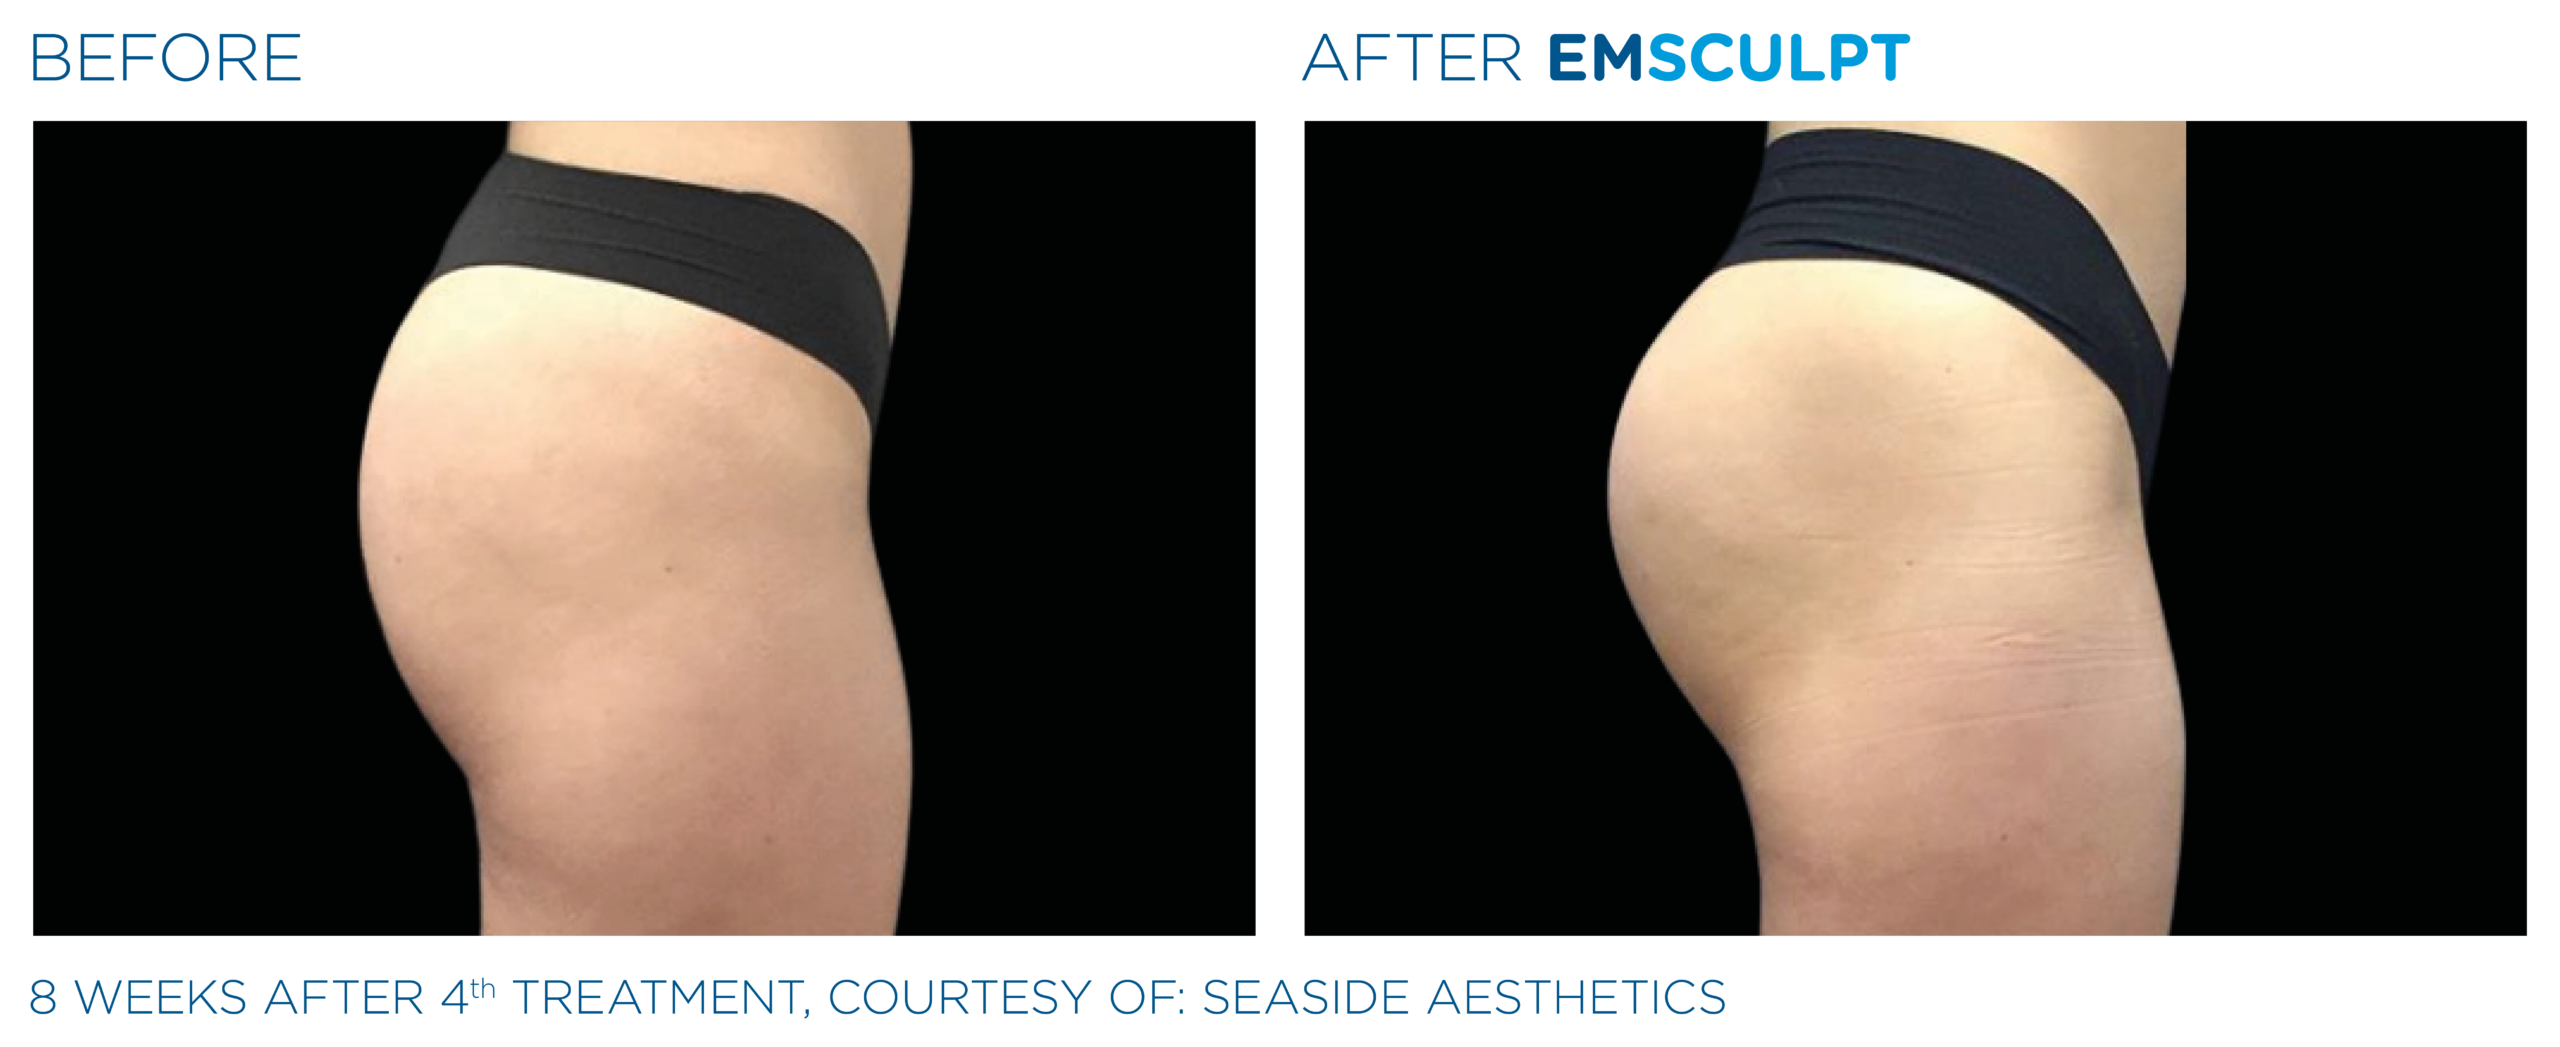 Two pictures showcasing the remarkable transformation of a woman's buttocks before and after undergoing EmSculpt body sculpting treatment.